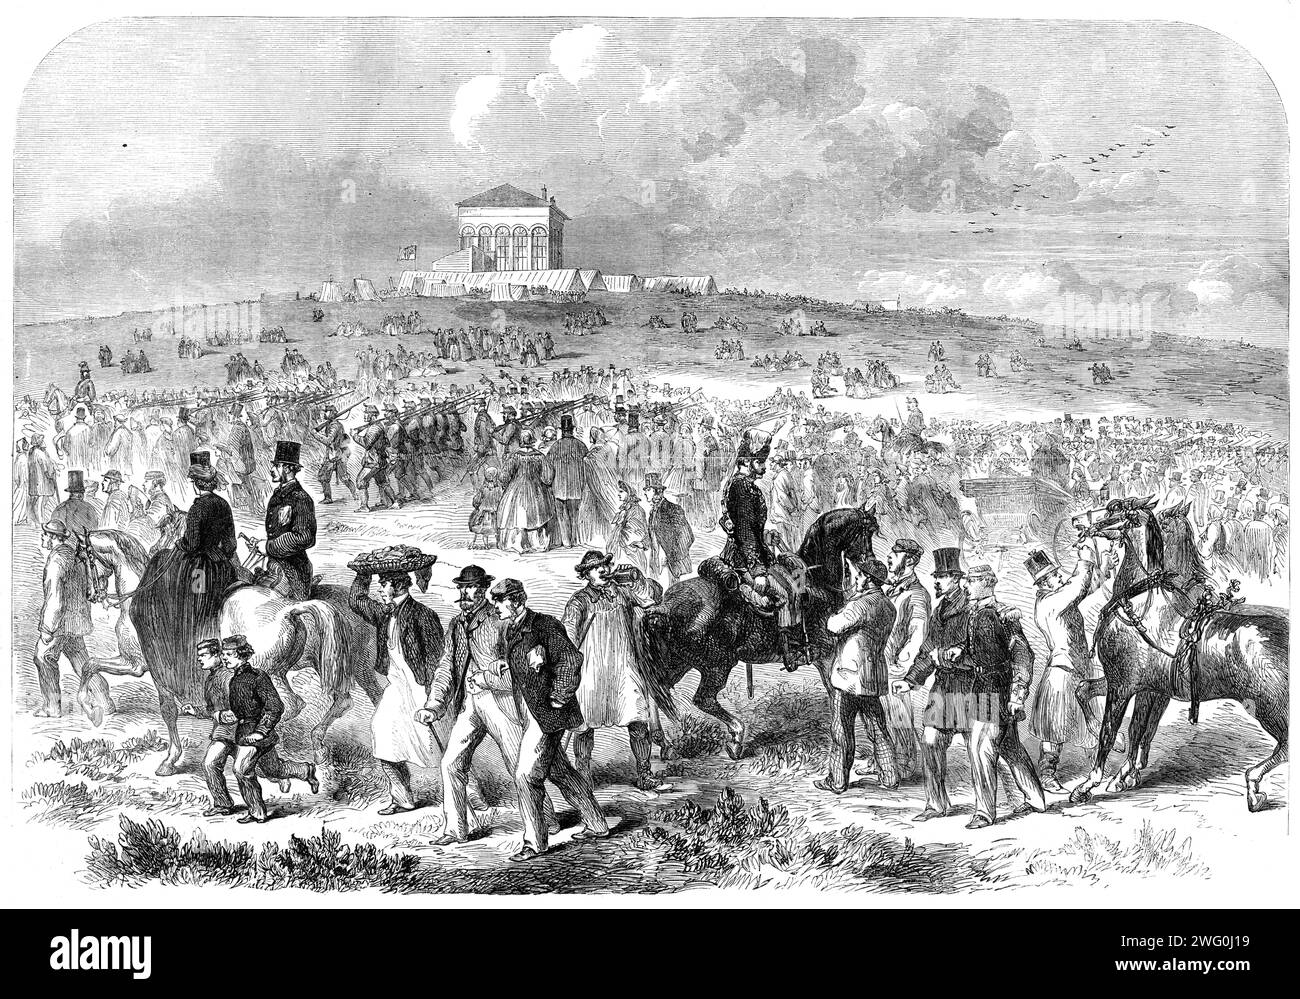 The Volunteer Field-Day at Brighton: arrival of volunteers on the racecourse, 1862. 'Nothing could be finer than the approach of something like 12,000 men in close column, at quick march, up the steep hill leading to the racecourse...The whole aspect of the field, as seen from the Grand Stand, was magnificent in the extreme...On each side, as far as the racecourse extended, was a dense body of spectators, which appeared to stretch away for miles...Again, in the fourth brigade of the second division...was a broad streak of scarlet, caused by the uniforms of the 3rd City of London and the 32nd M Stock Photo